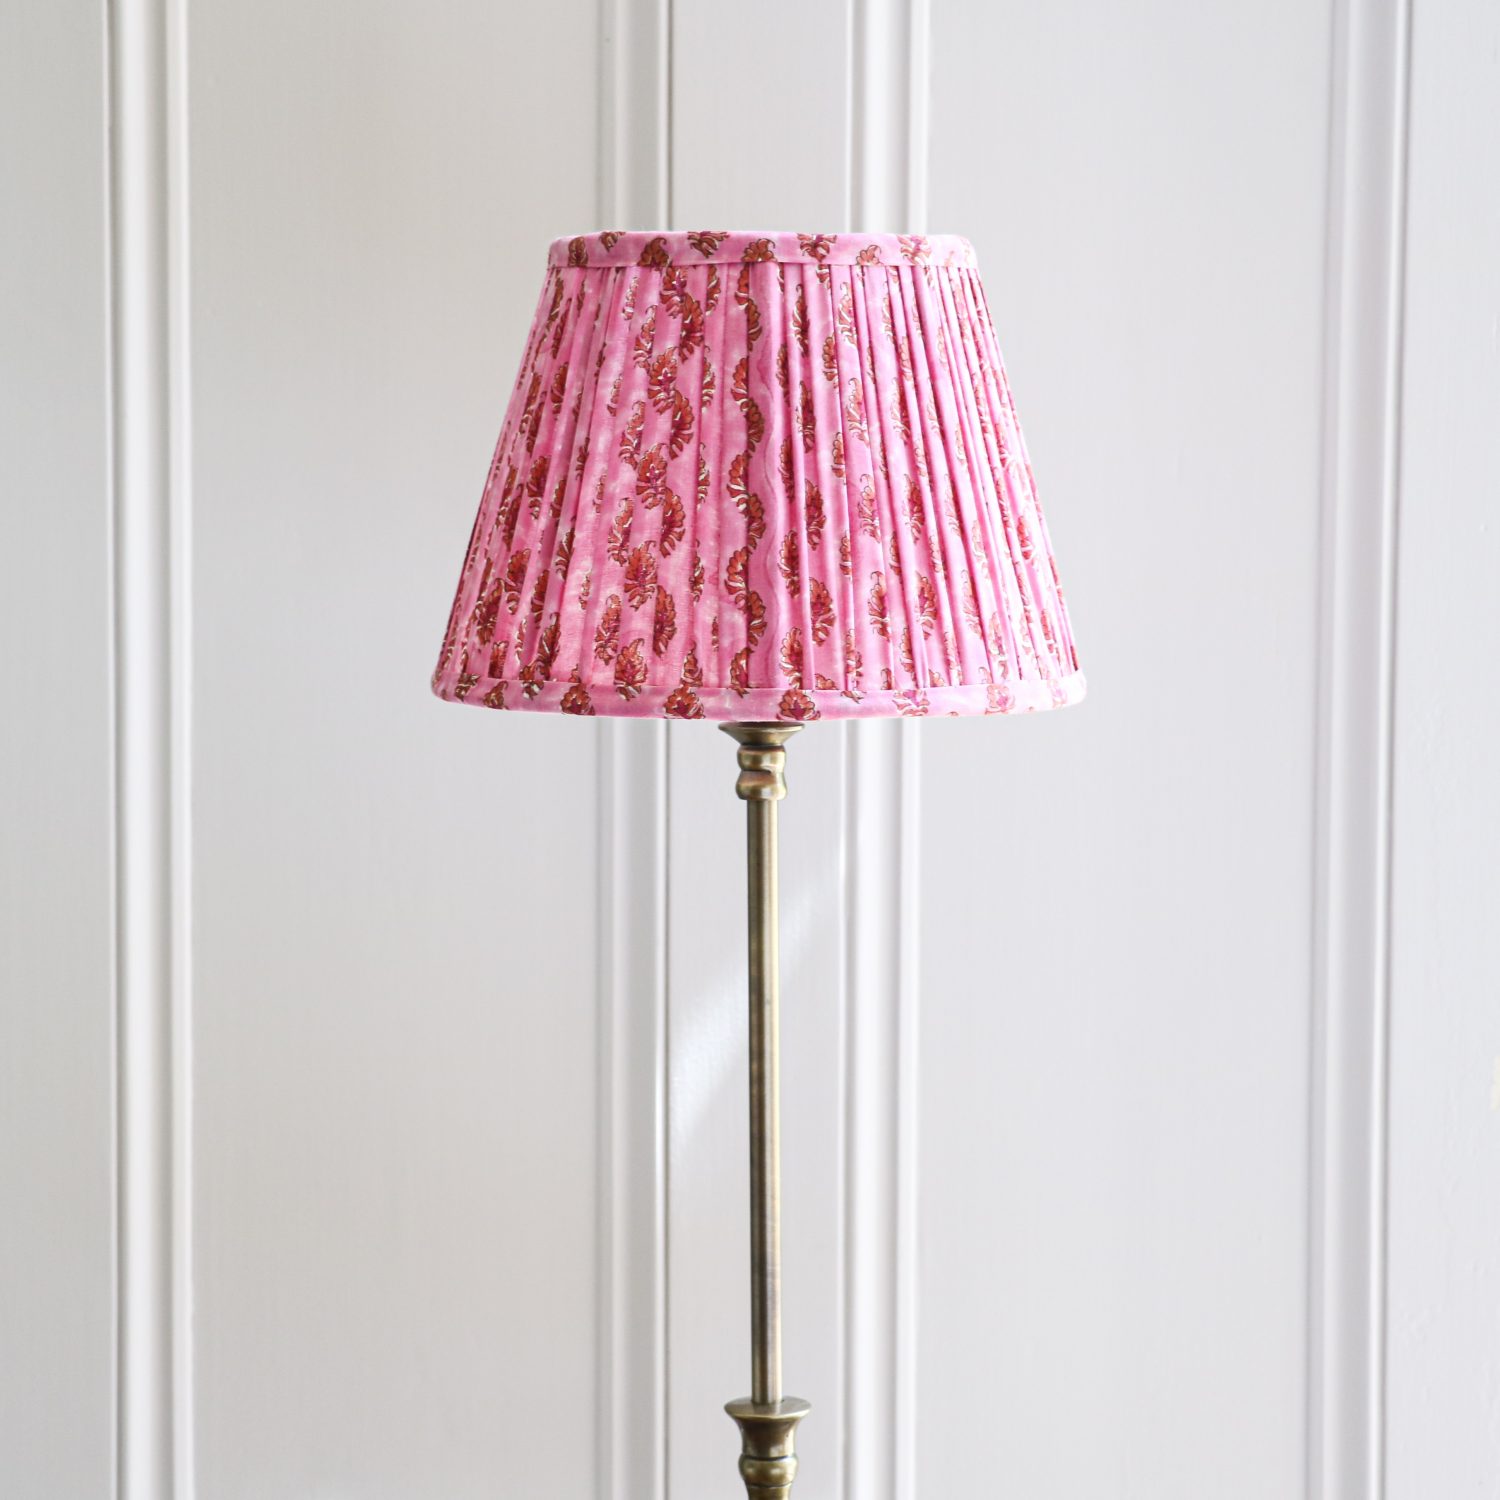 Båstad Lampshade In Pink Red Shenouk, Red Table Lamp Shades Only